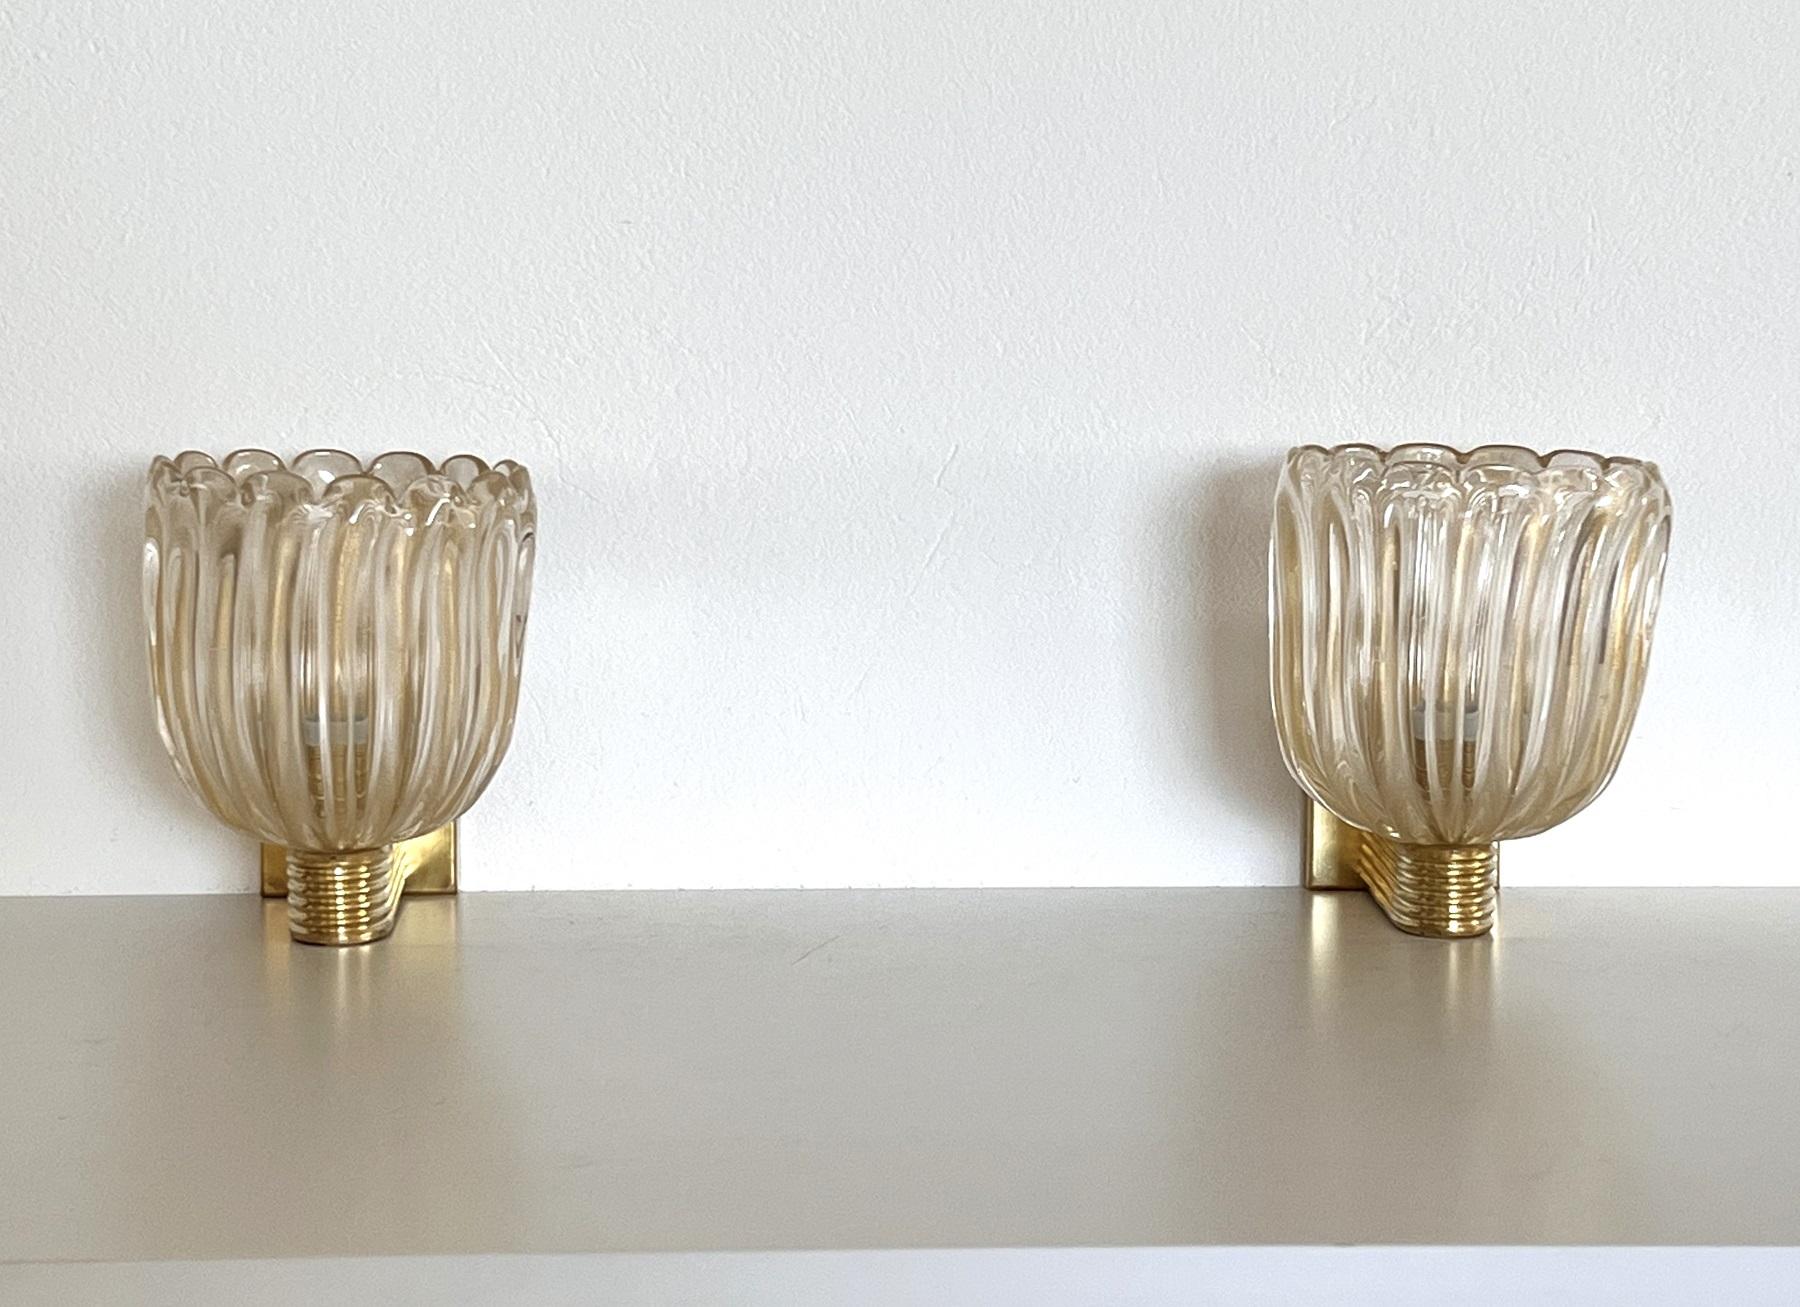 Beautiful set of two gorgeous brass wall lamps made of strong brass base and transparent thick Murano glasses with golden shimmer/glitter inside the glass. Art Deco style.
The beautiful hand-crafted glasses have a slight wave shape, please look